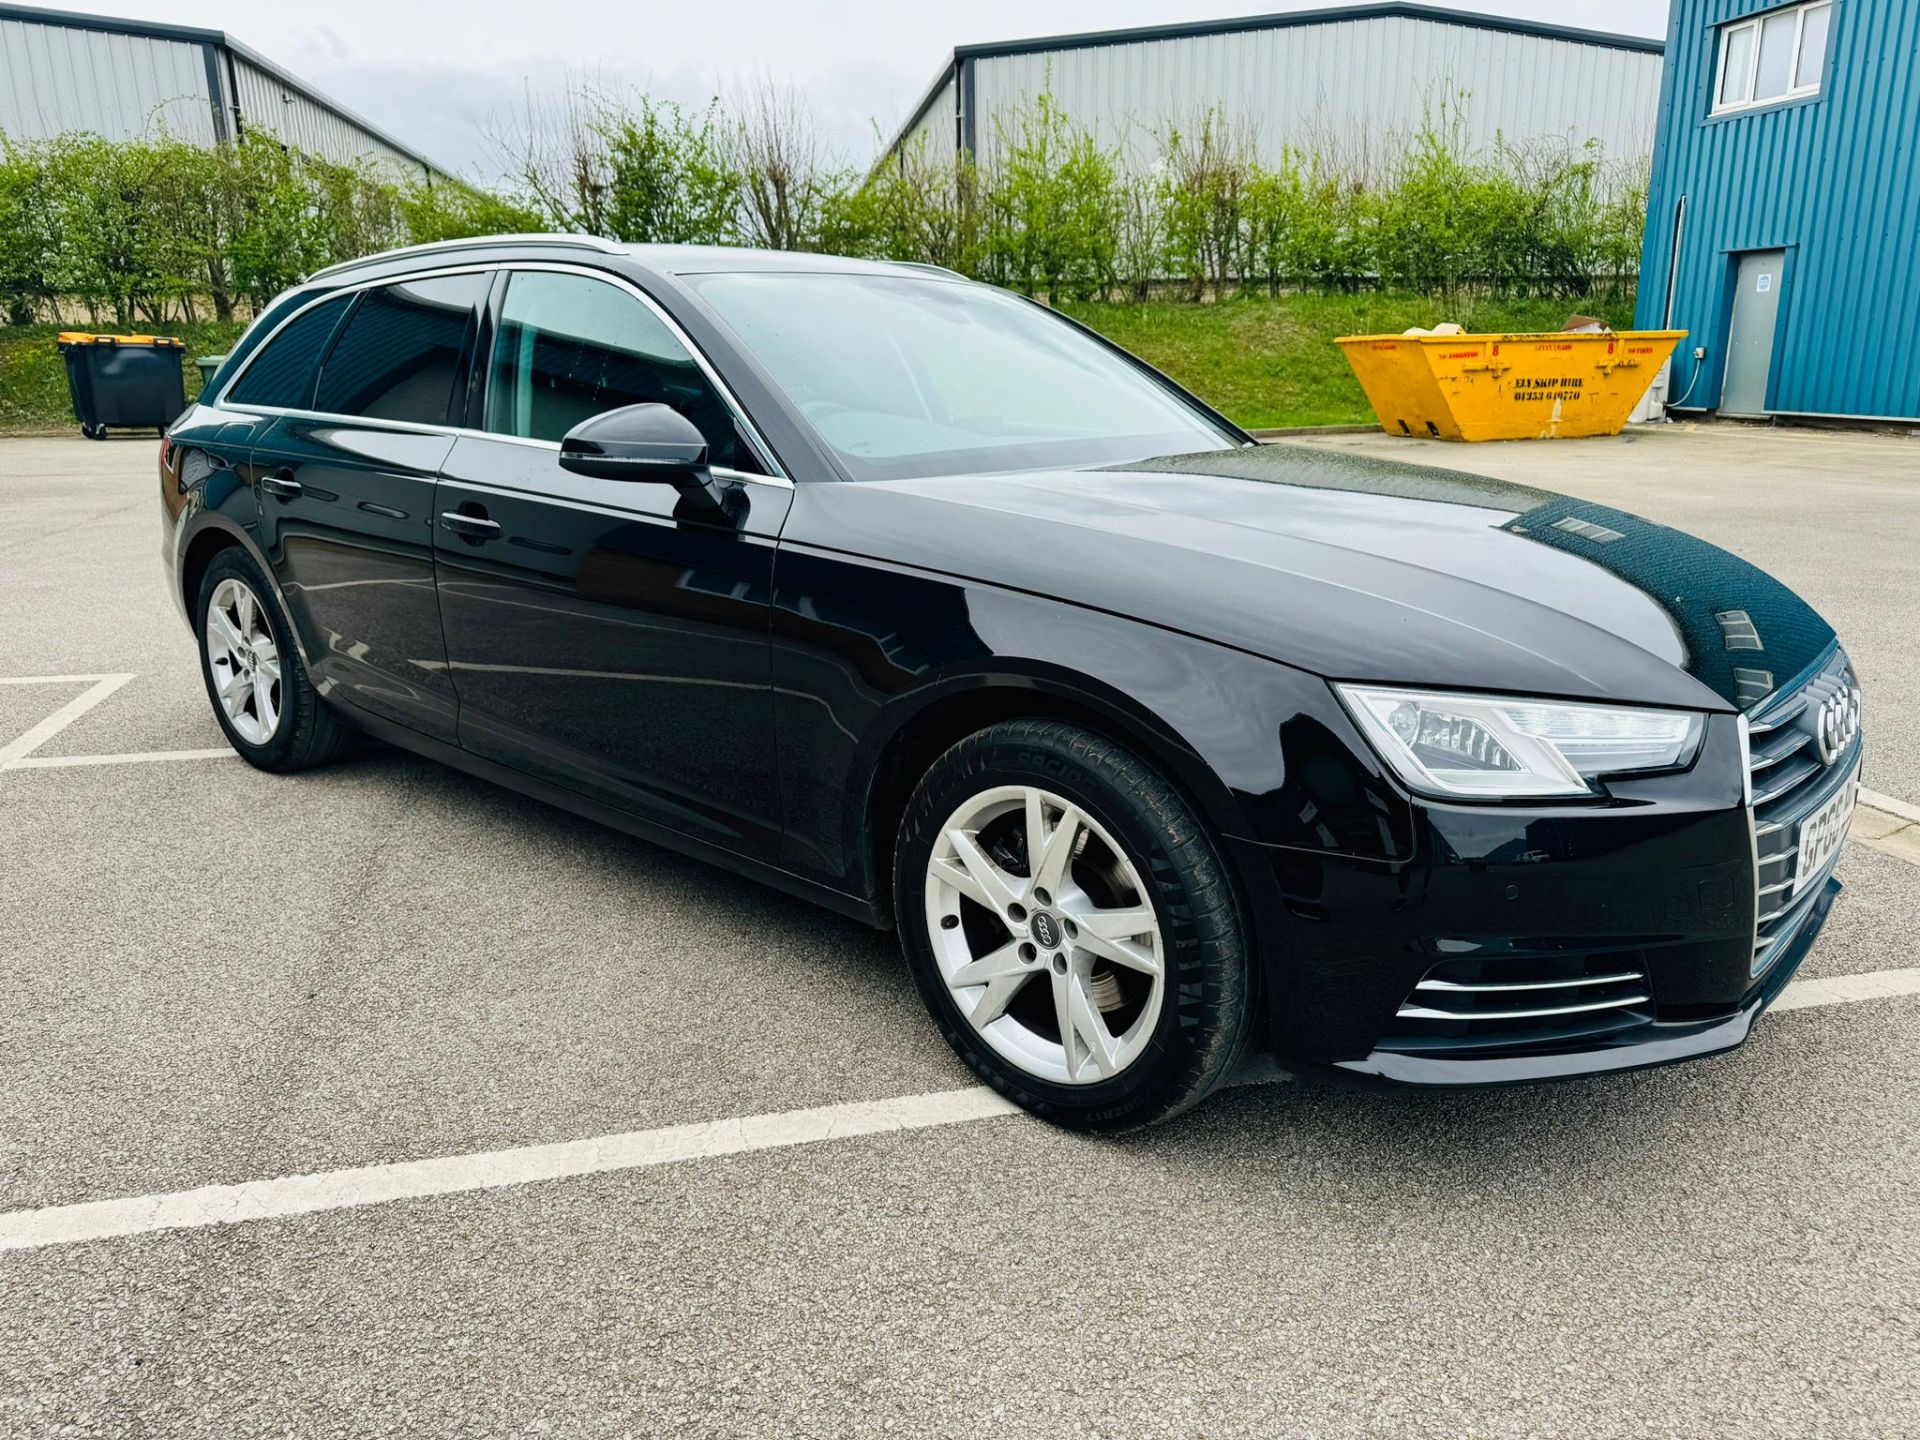 (RESERVE MET)Audi A4 1.4 FSI Sport Estate - (2017 Year) - Full Service History - Air Con - Only 24K